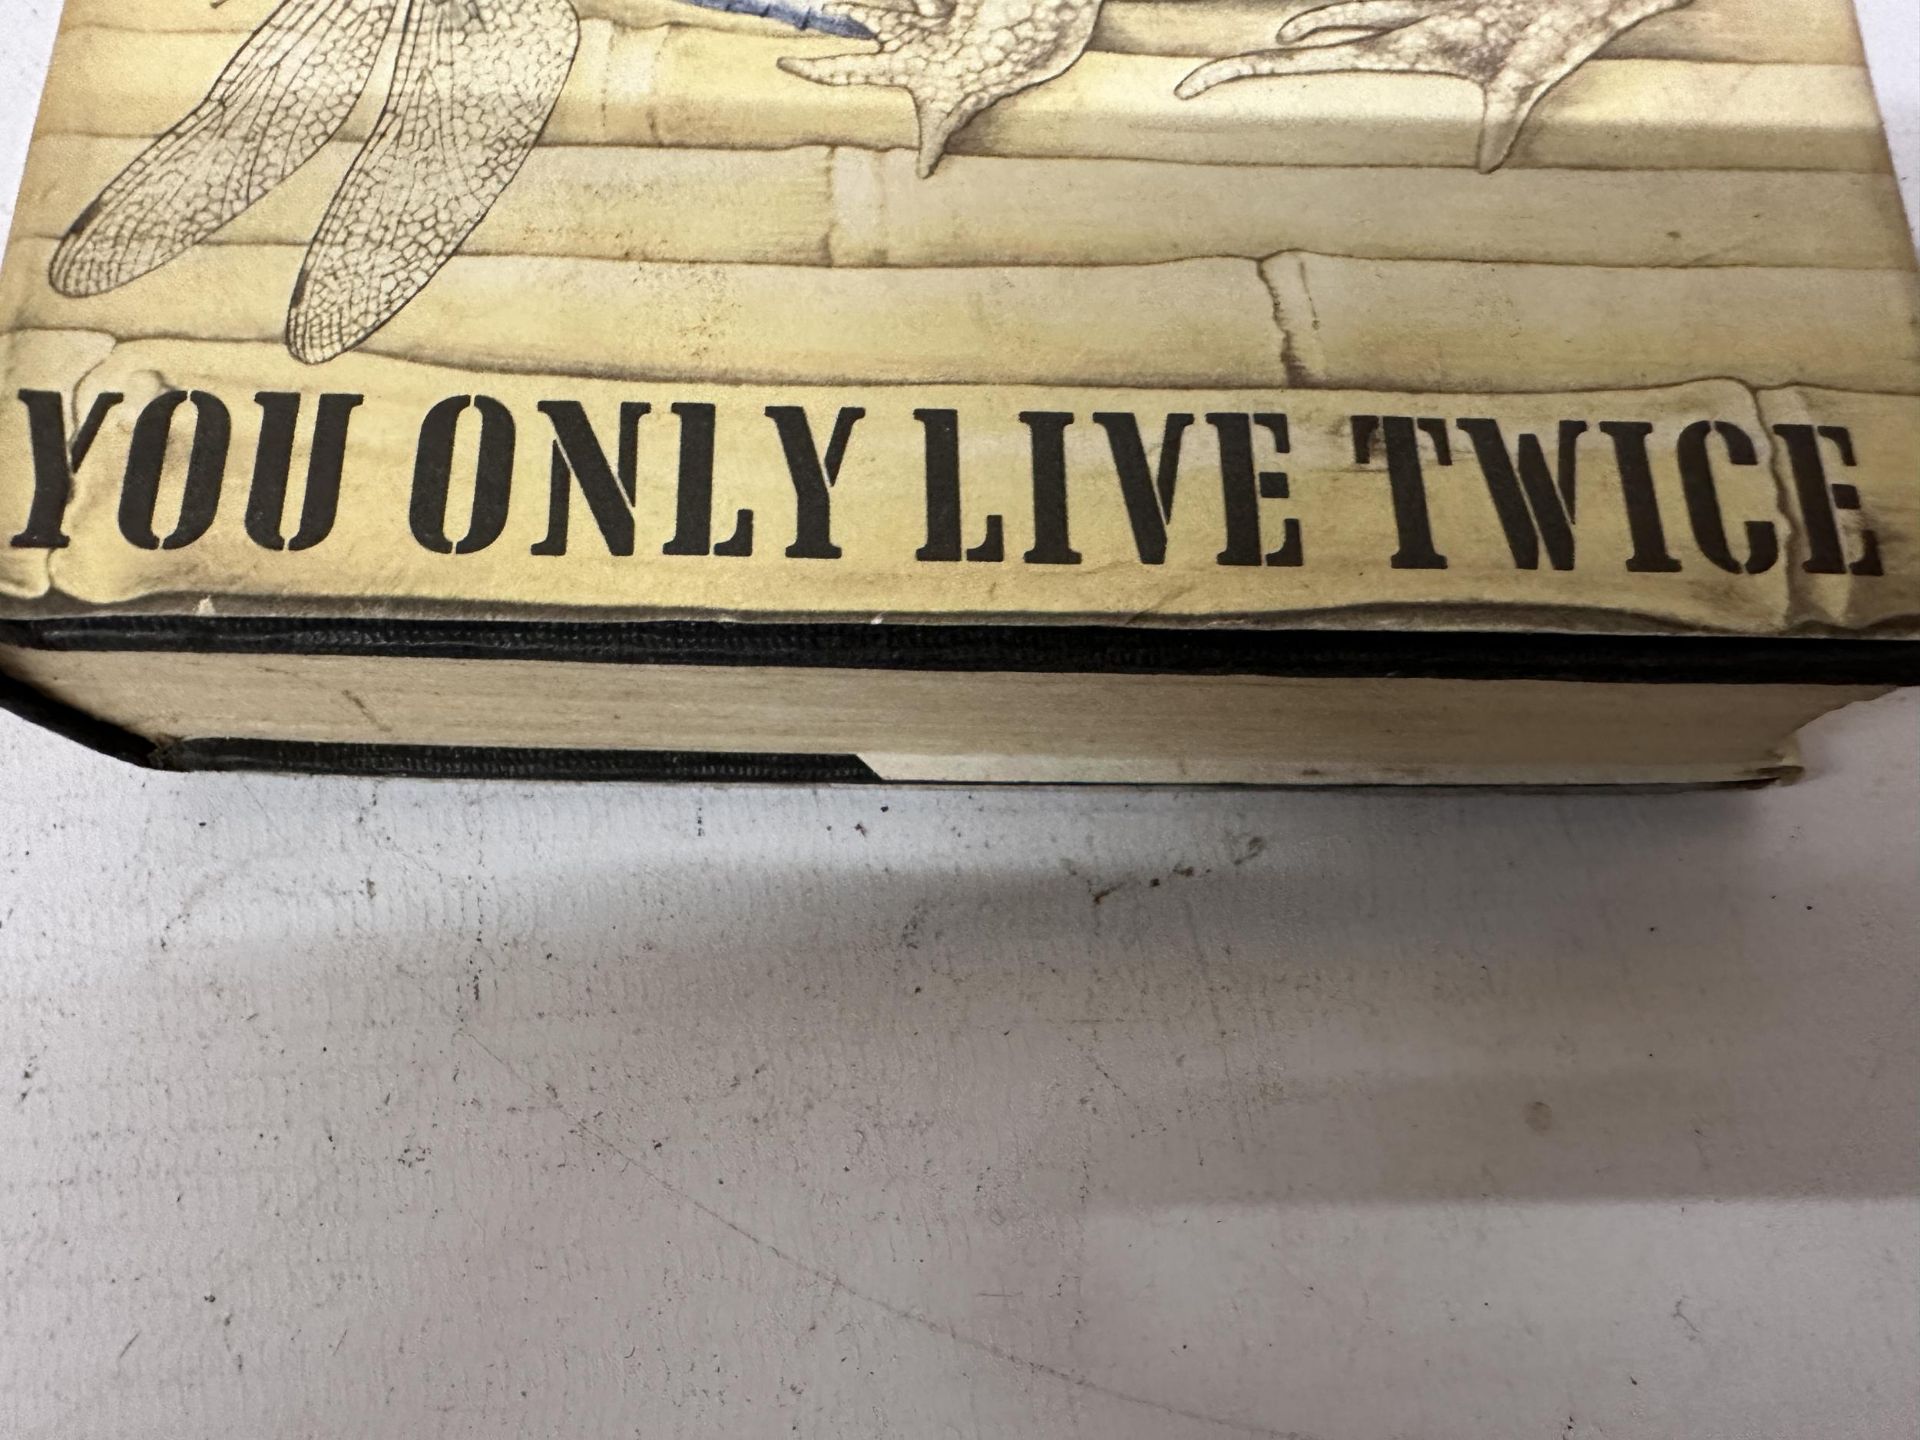 A 1964 IAN FLEMING FIRST EDITION, YOU ONLY LIVE TWICE, JAMES BOND HARDBACK BOOK COMPLETE WITH - Image 2 of 6